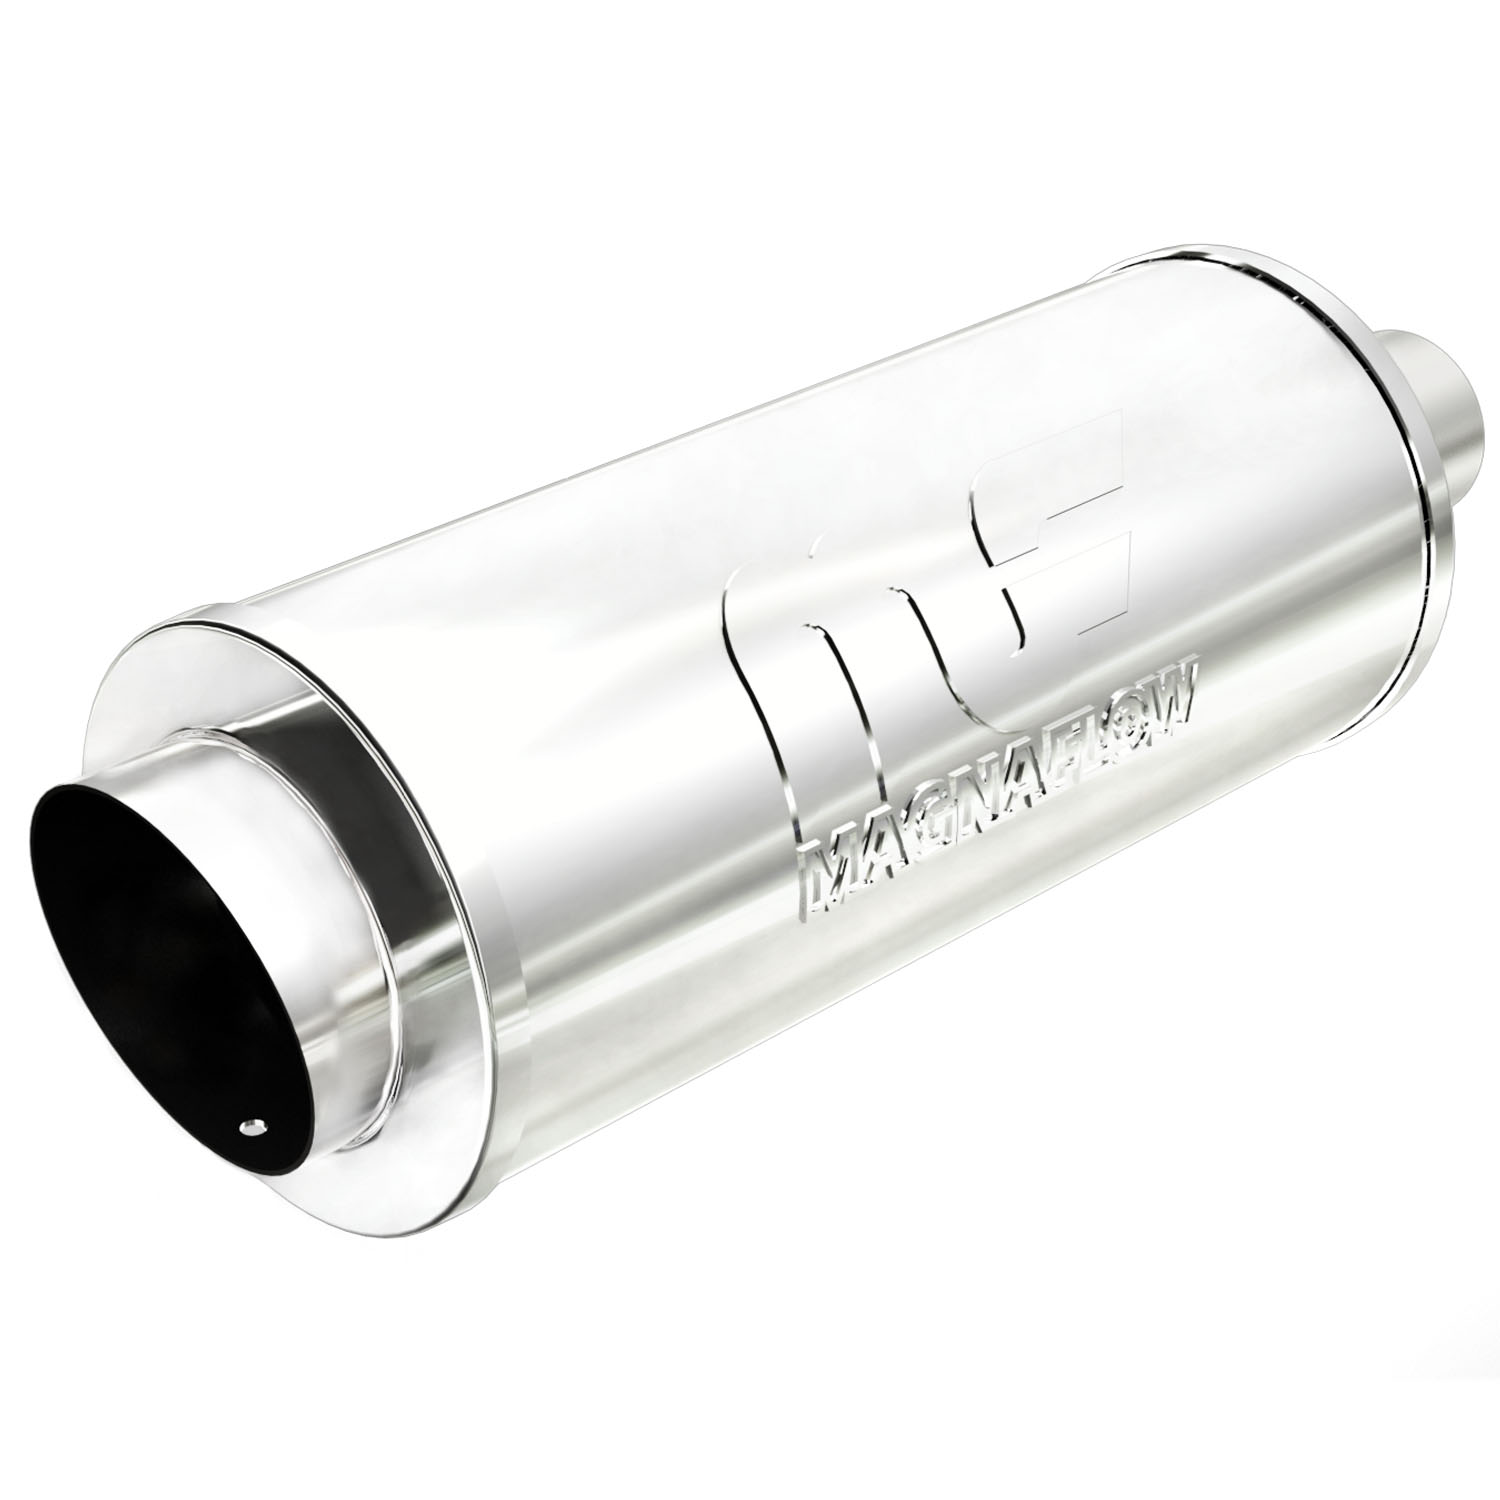 Race Series Universal Muffler With Single Tip Inlet/Outlet: 2.25"/4"